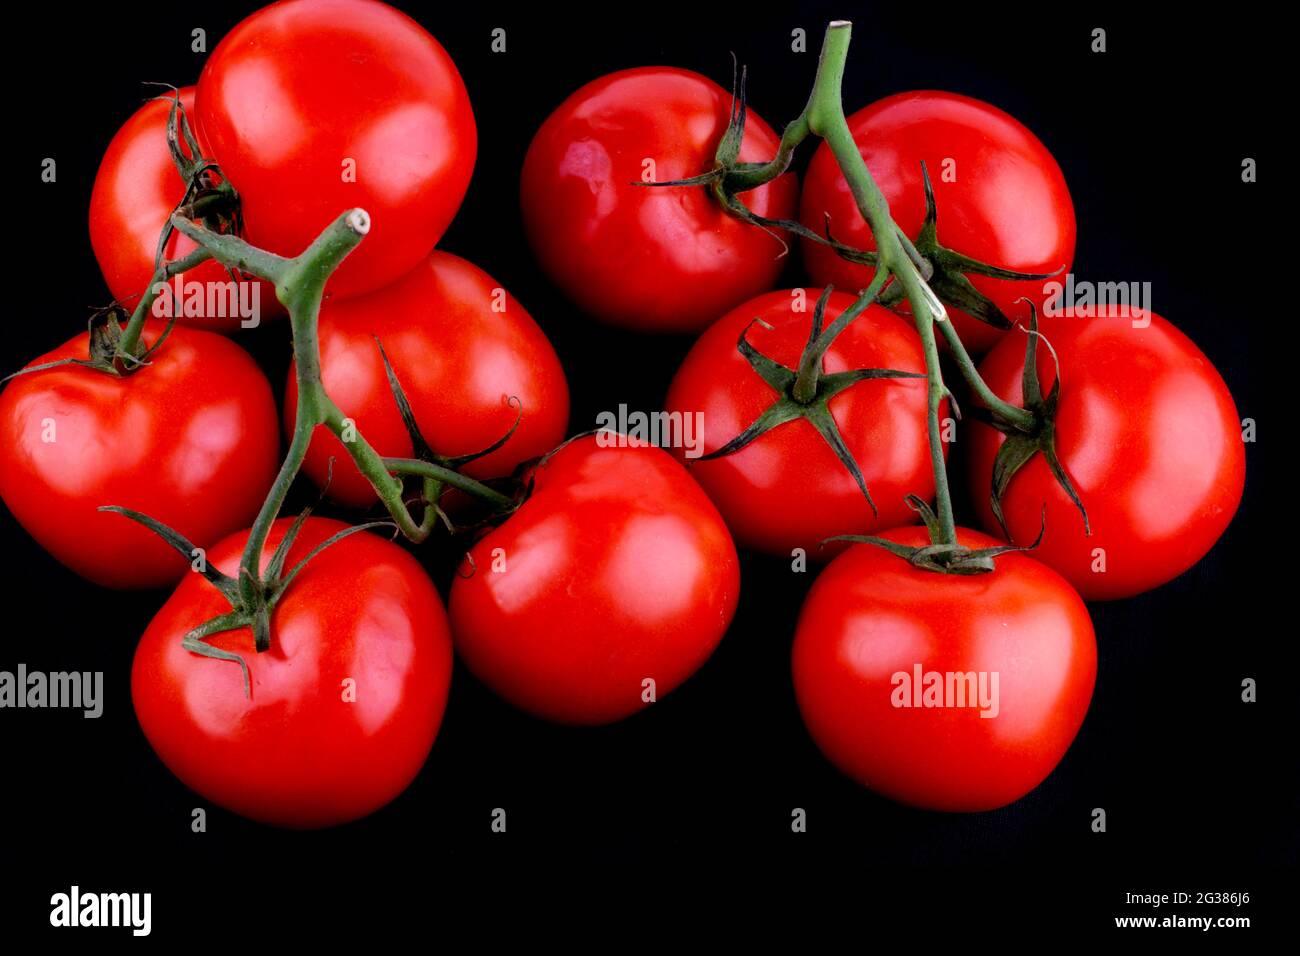 Red Tomato with Stem,isolated on black. The tomato is the edible berry of the plant Solanum lycopersicum, commonly known as a tomato plant. Andalucia, Stock Photo